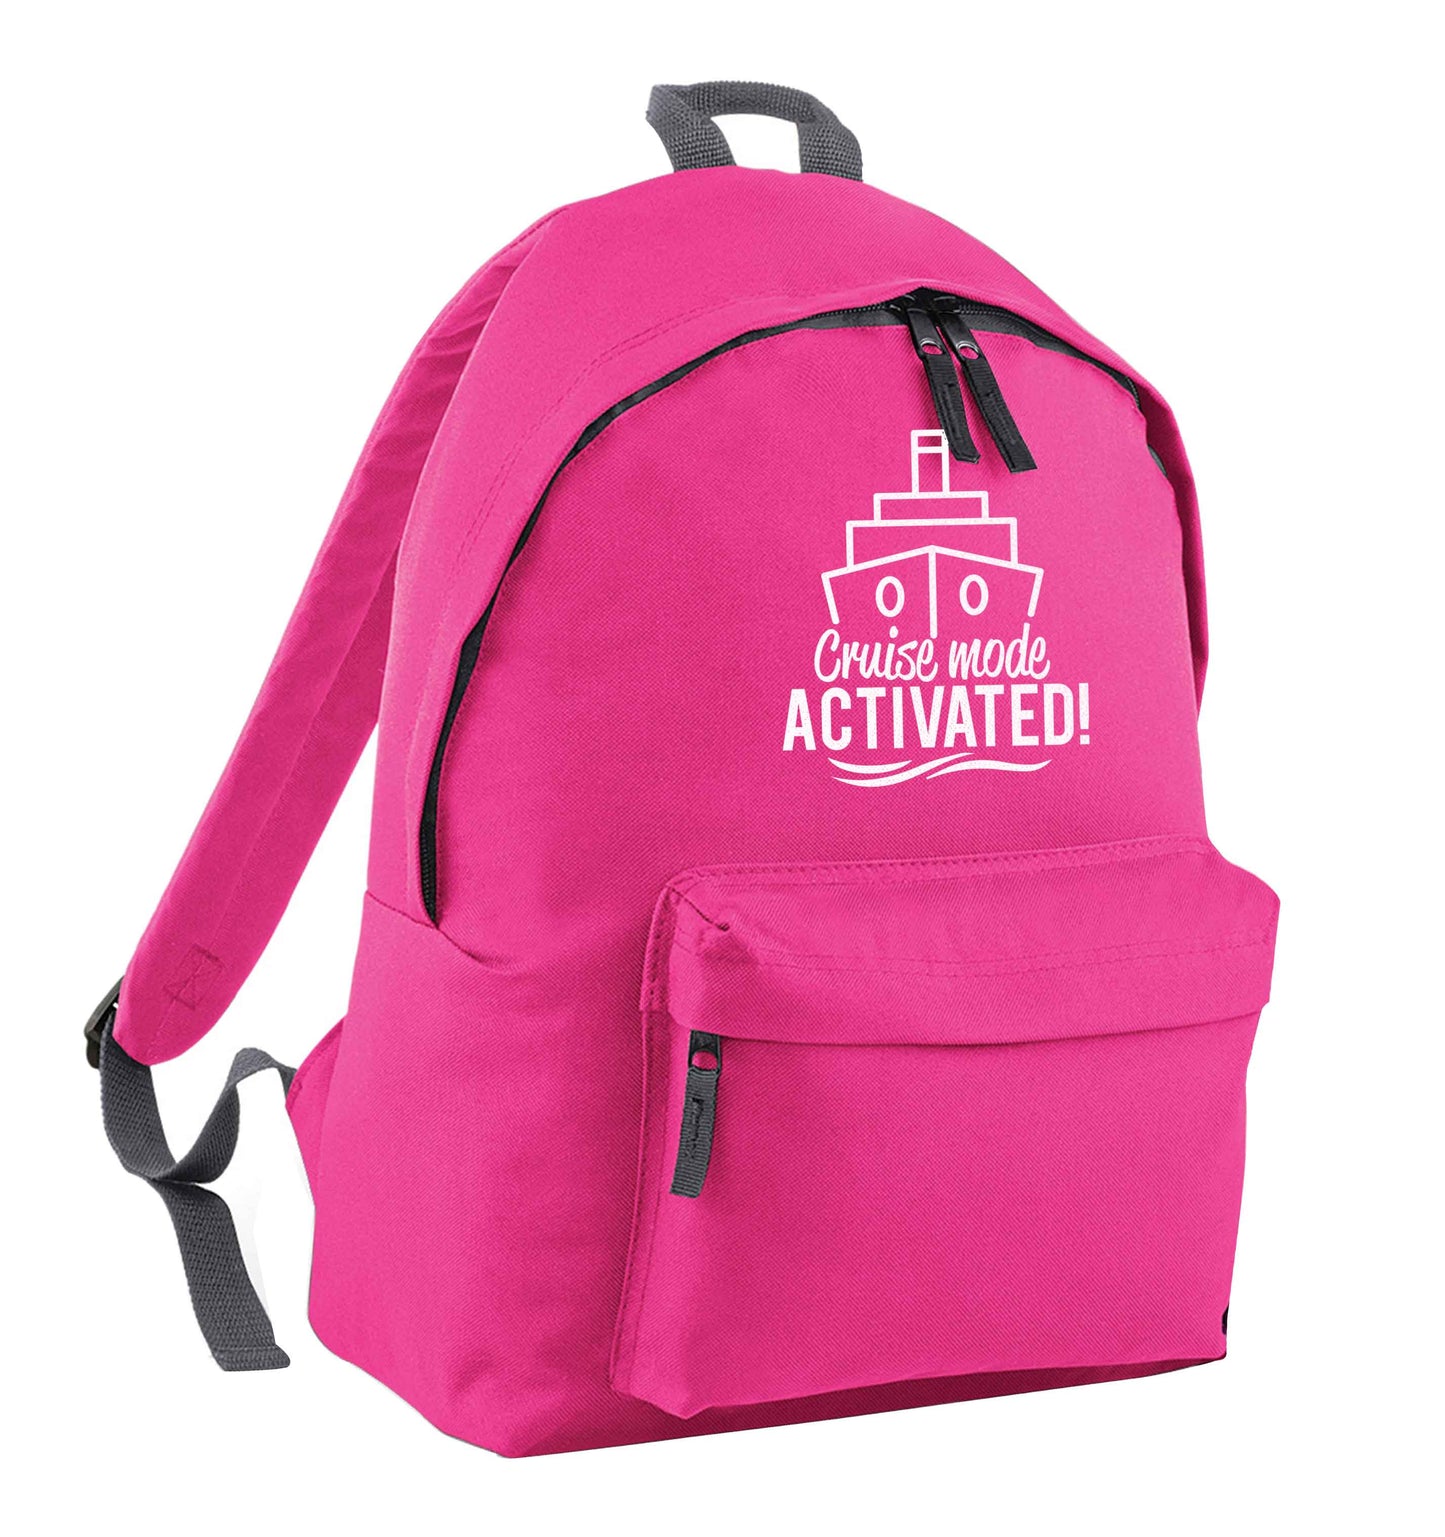 Cruise mode activated pink children's backpack